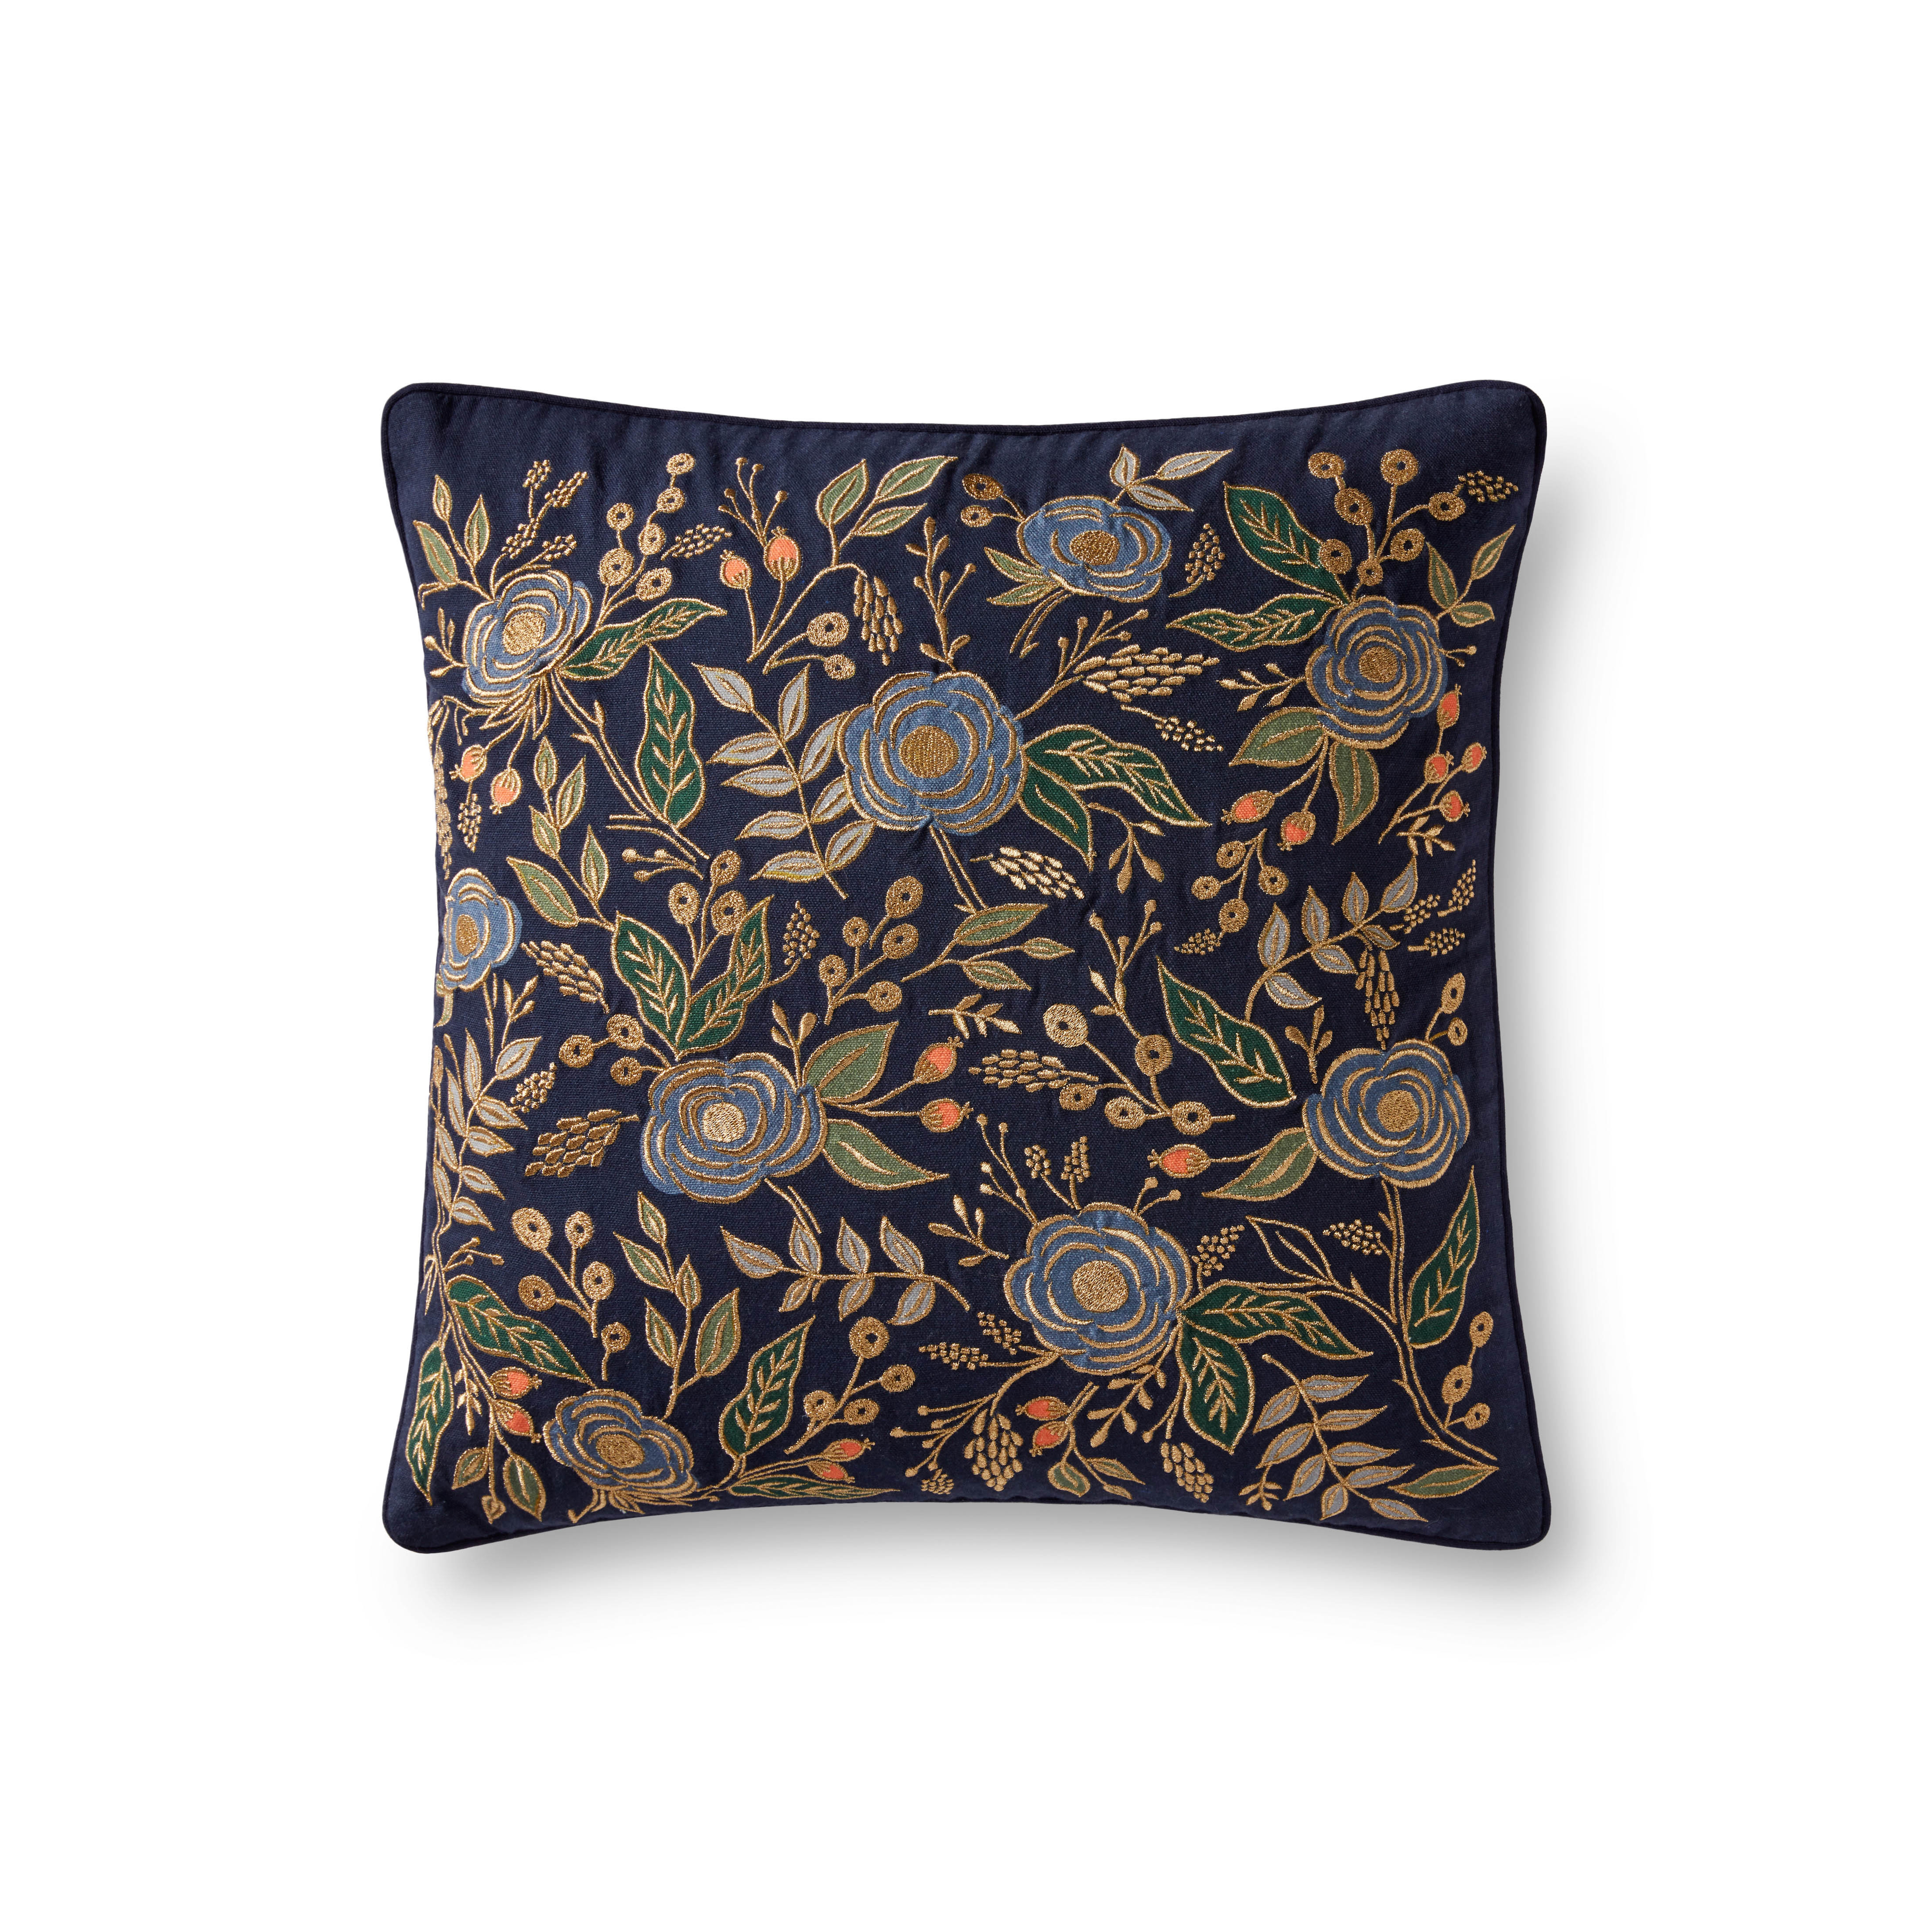 PILLOWS P6073 NAVY / MULTI 18" x 18" Cover Only - Rifle Paper Co. x Loloi